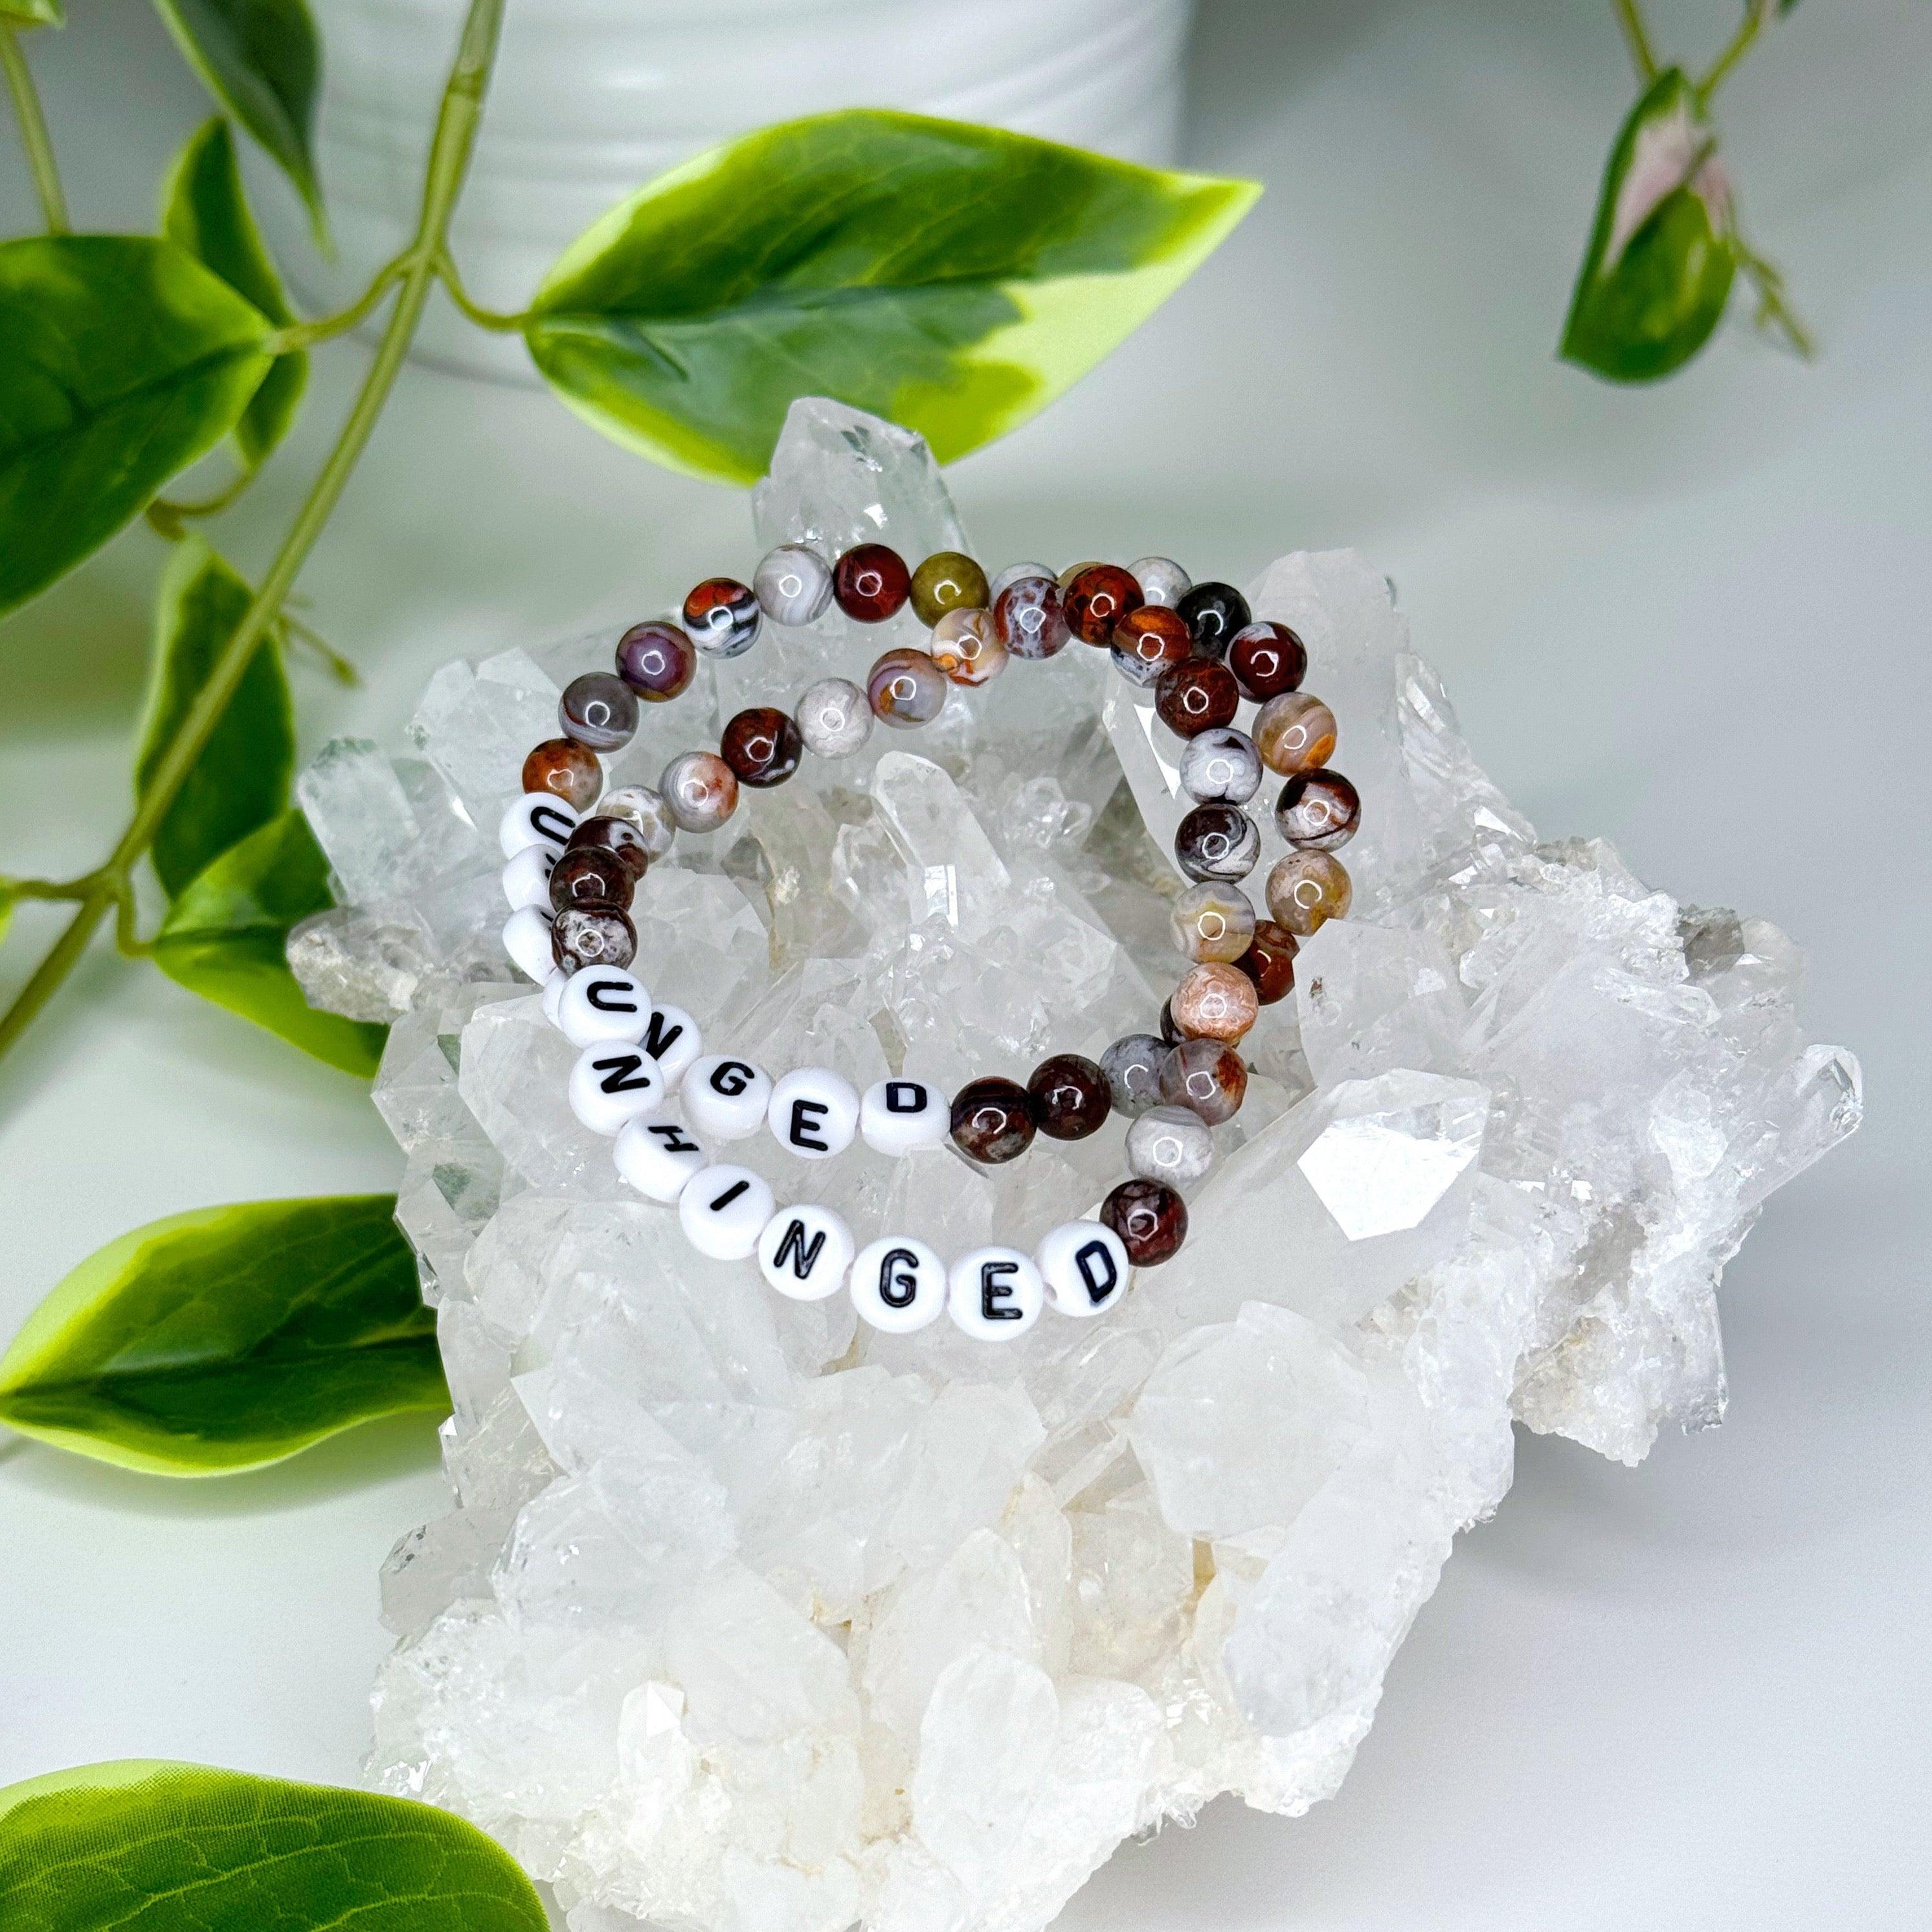 &#39;UNHINGED&#39; LAGUNA AGATE 6mm - HANDMADE CRYSTAL BRACELET - 6mm, agate, bracelet, brown, crystal bracelet, fire, gemini, gemini stack, grey, handmade bracelet, jewelry, laguna agate, market bracelet, mixed colors, recently added, spring collection, unhinged, Wearable - The Mineral Maven